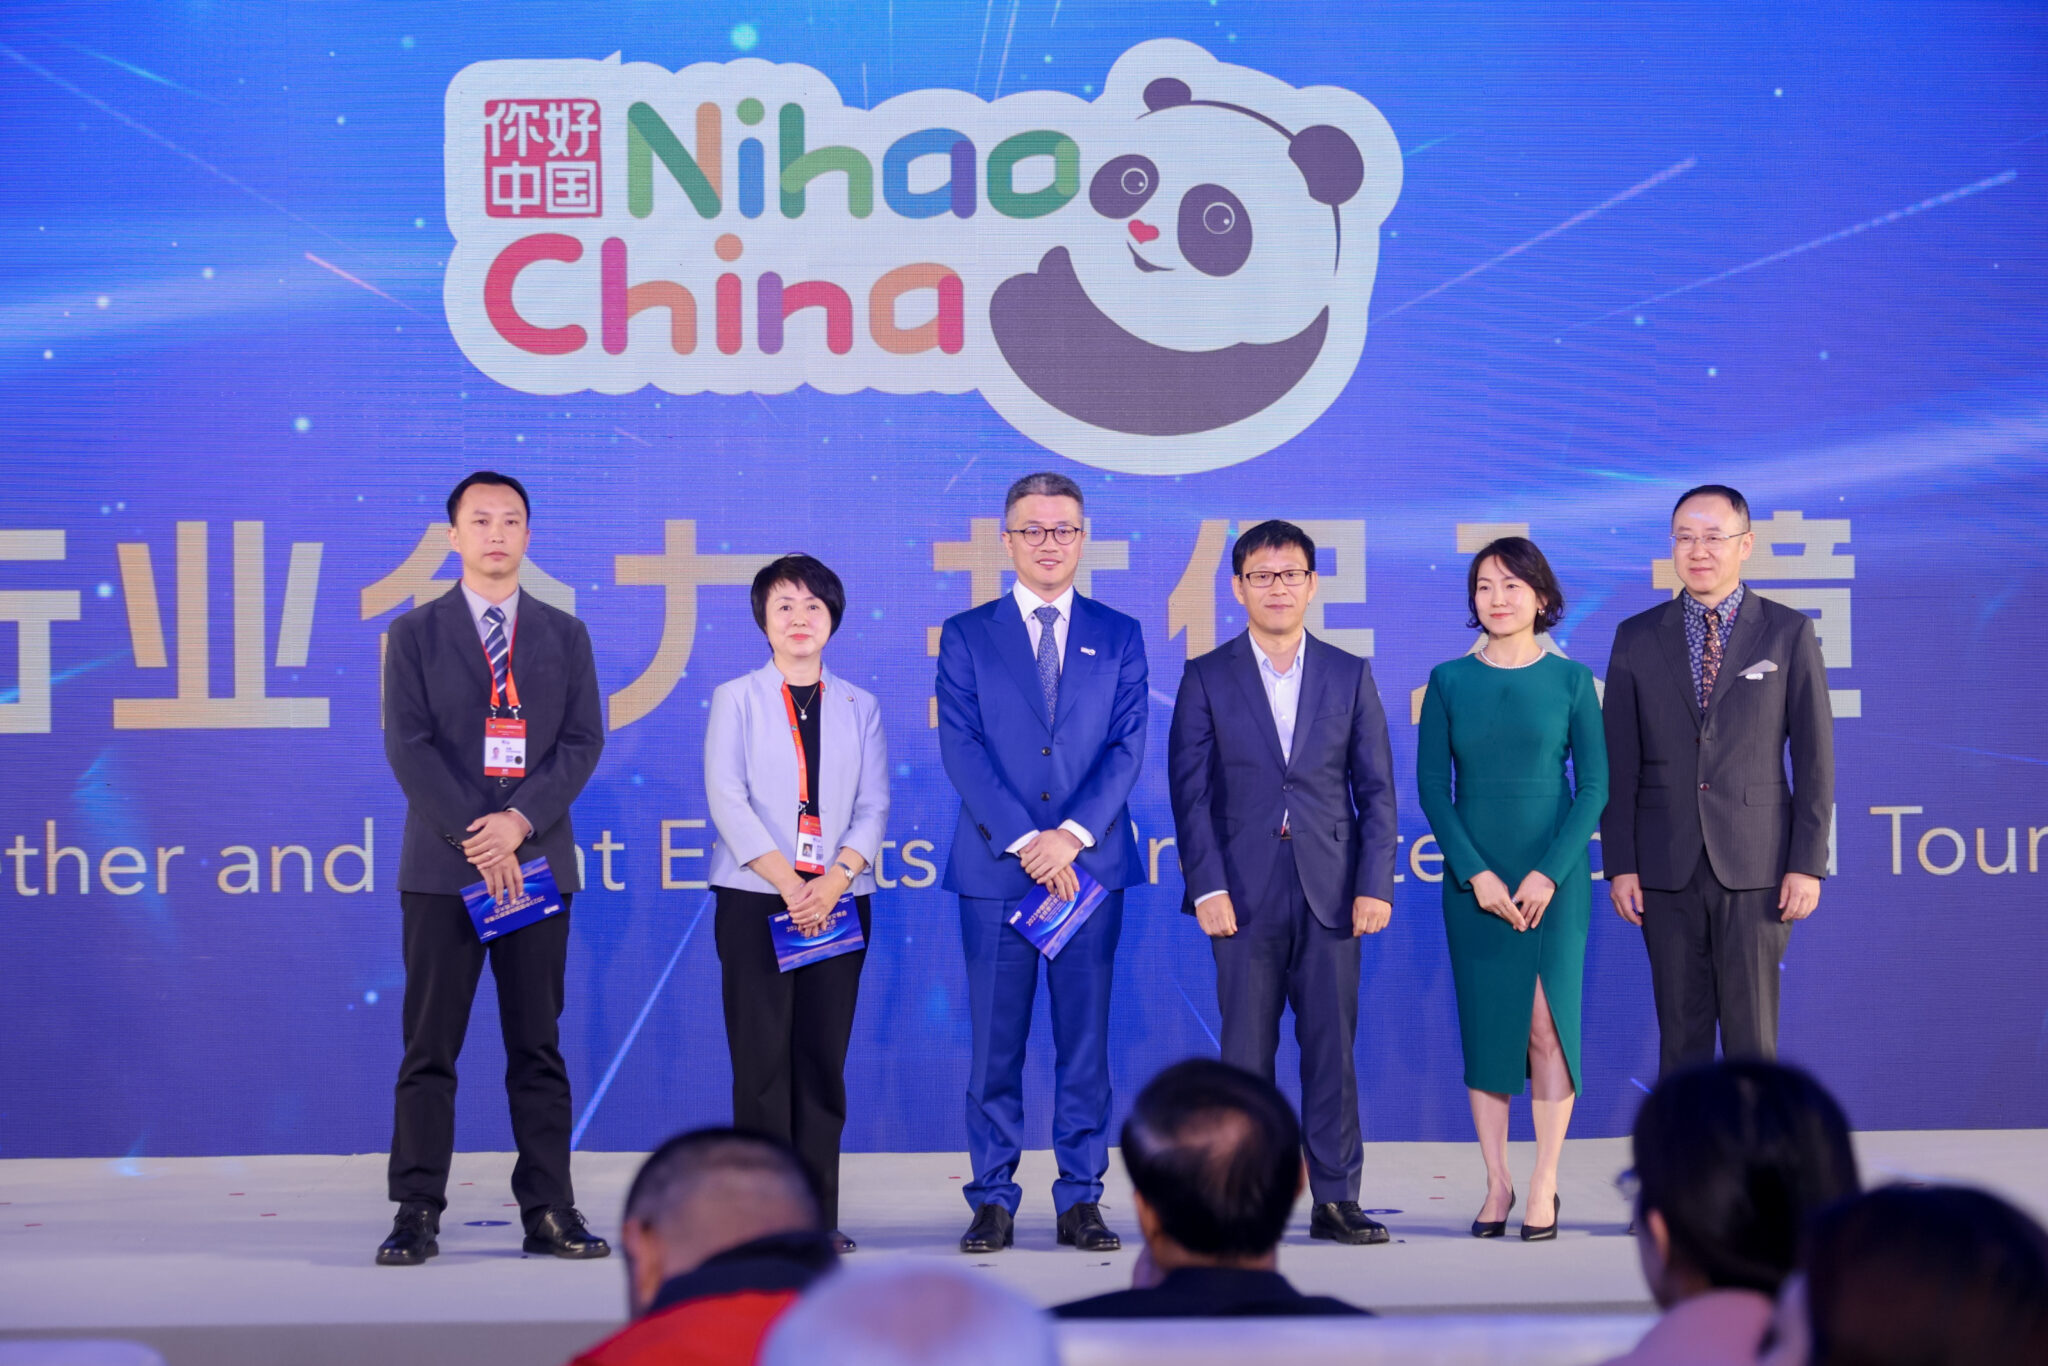 Trip.com Group and other companies jointly released inbound tourism collaborative initiatives